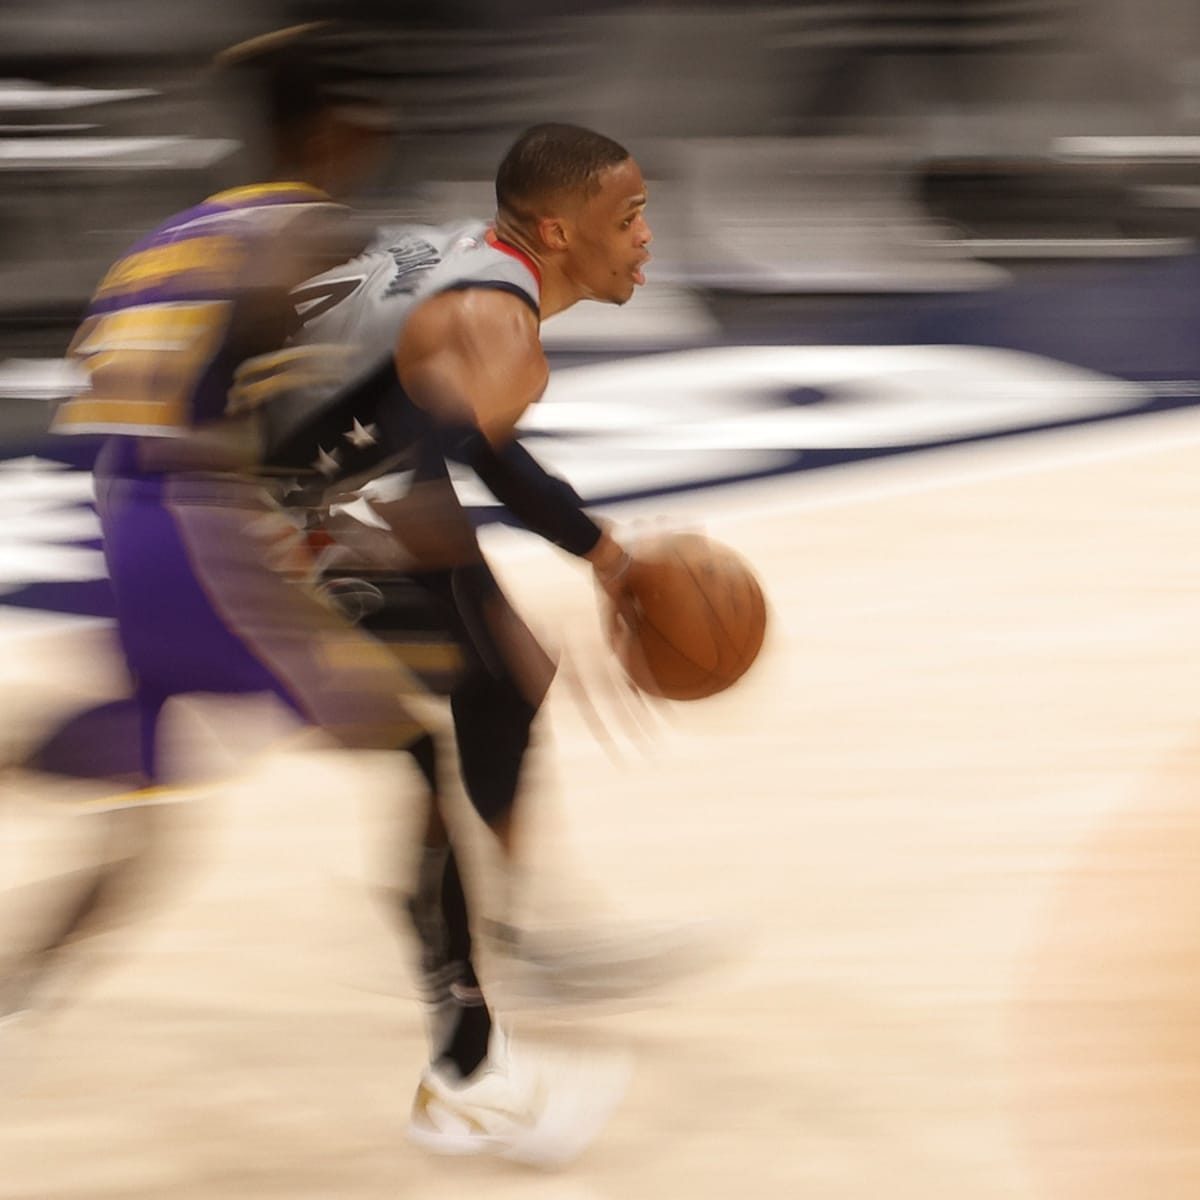 Will Russell Westbrook Have Triple-Double in Lakers Debut vs